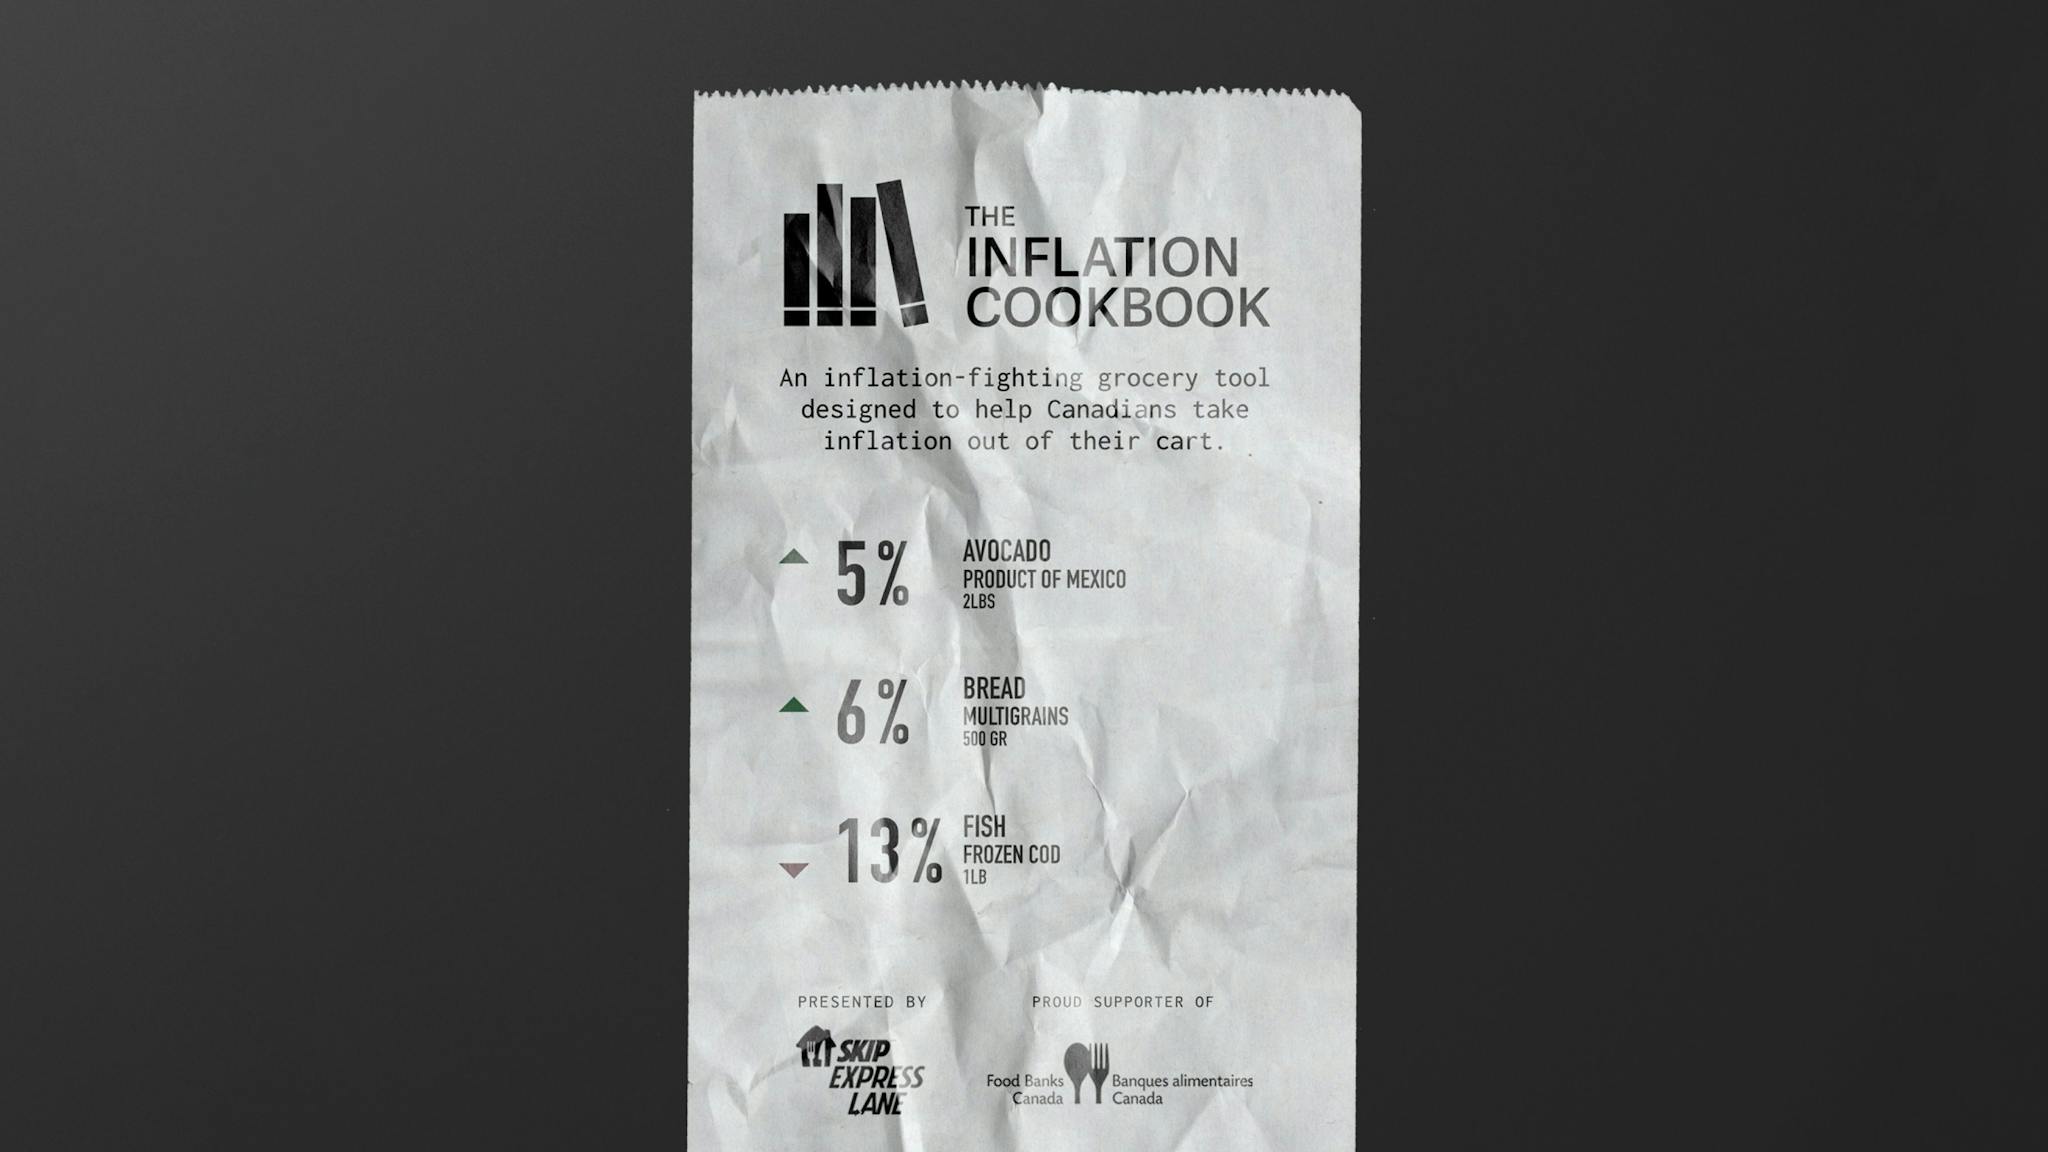 The Inflation Cookbook receipt